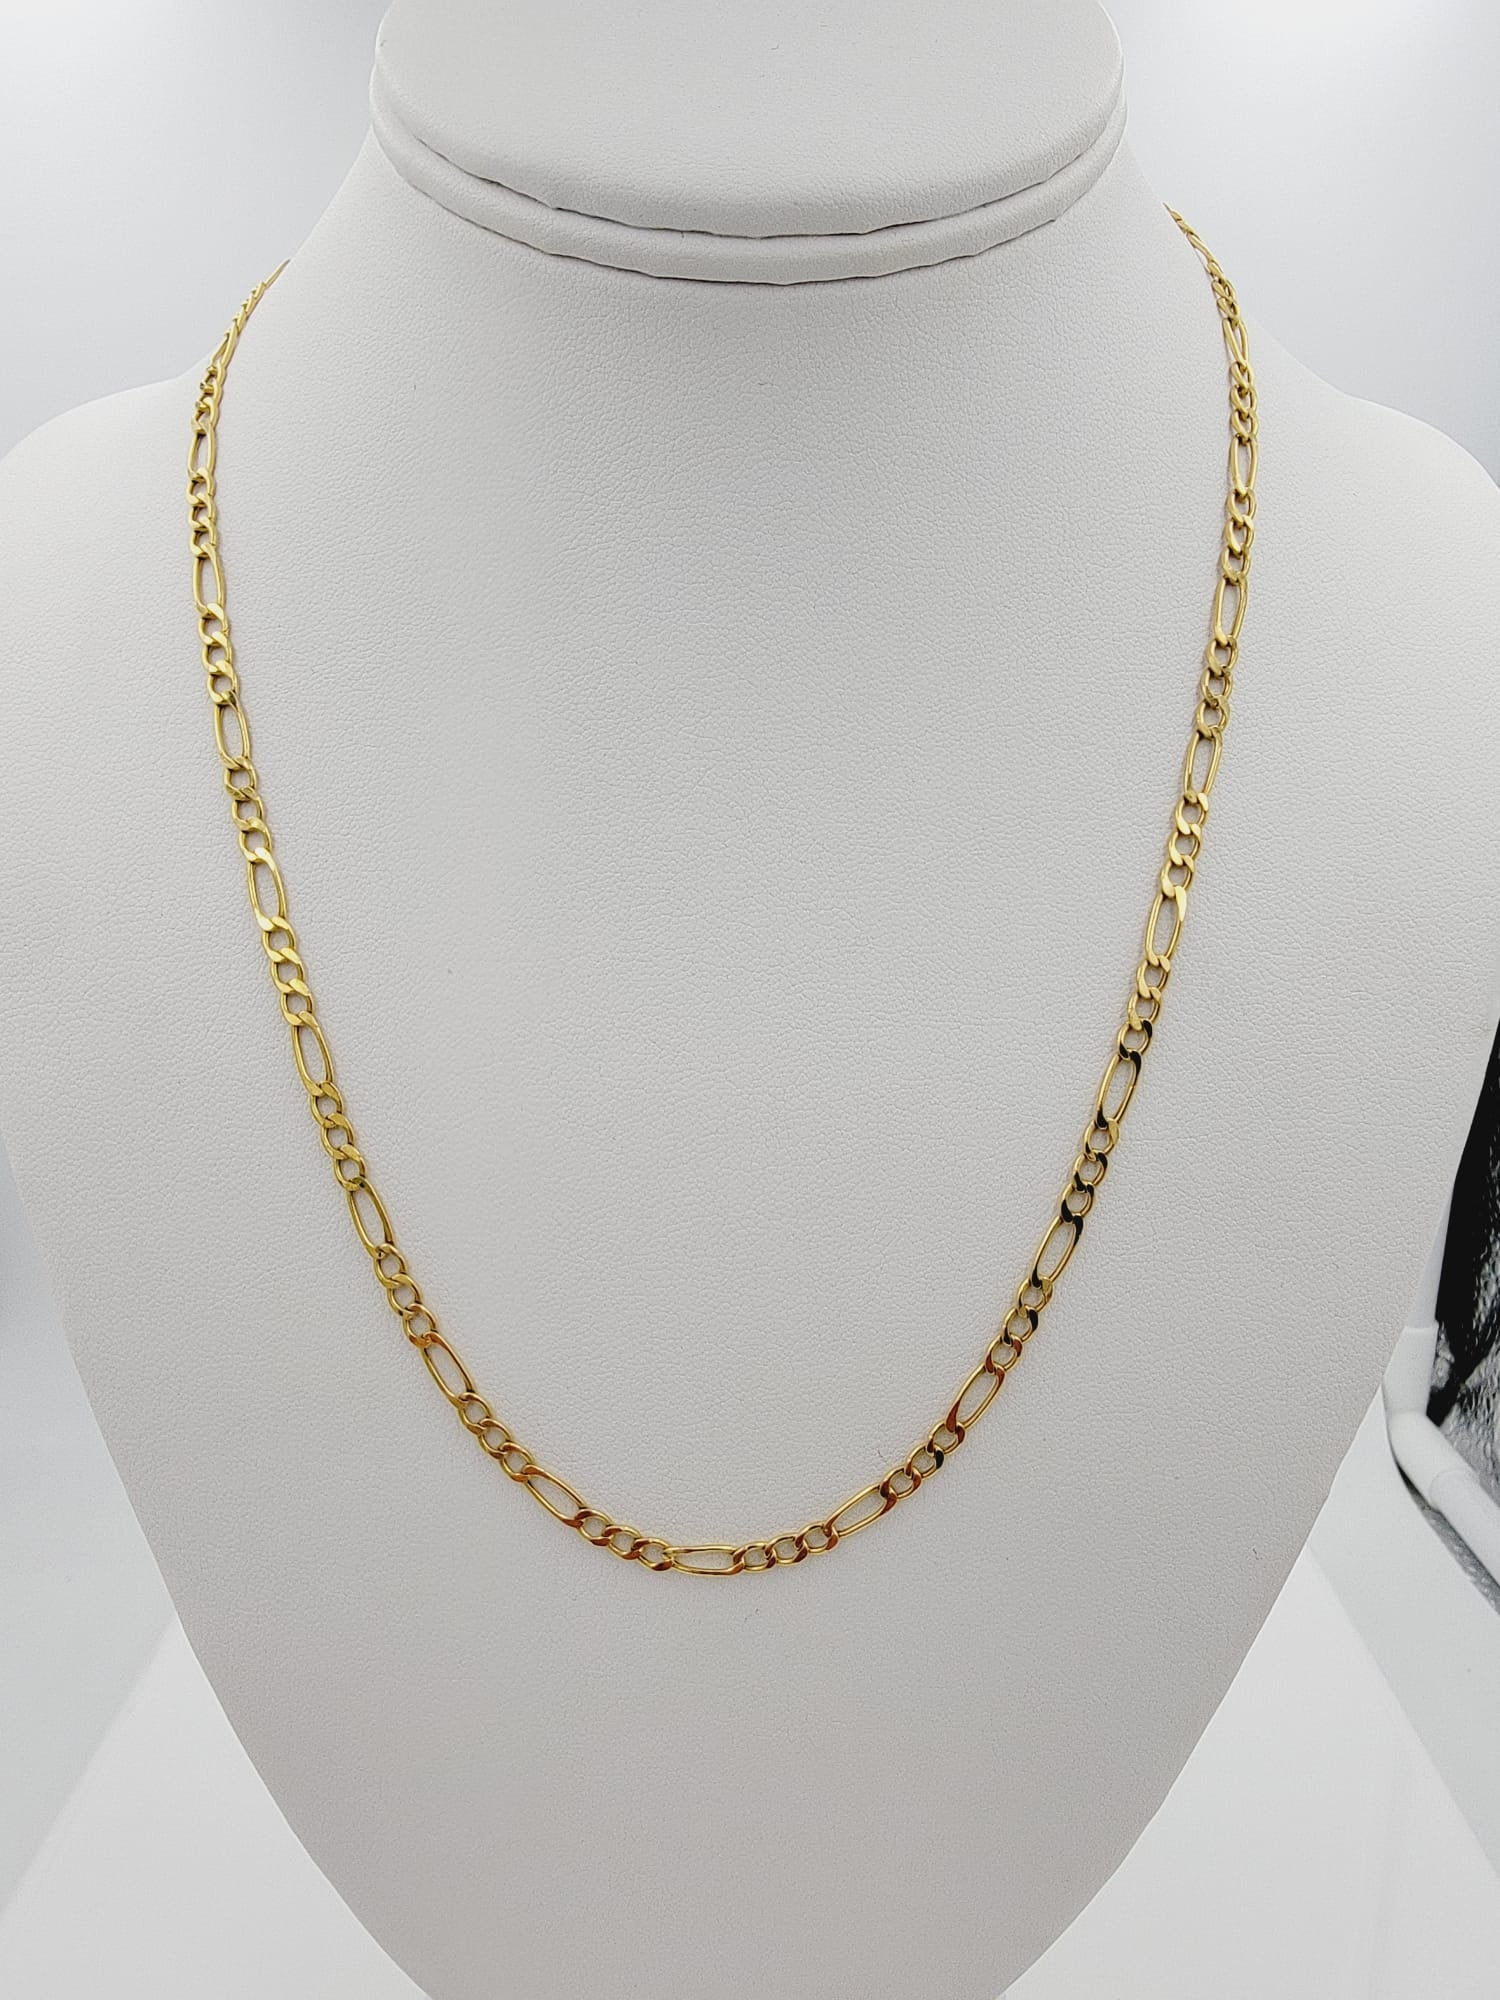 14k Solid Yellow Gold Figaro Chain, 20 Inch, 3.4mm, 5.0 Grams